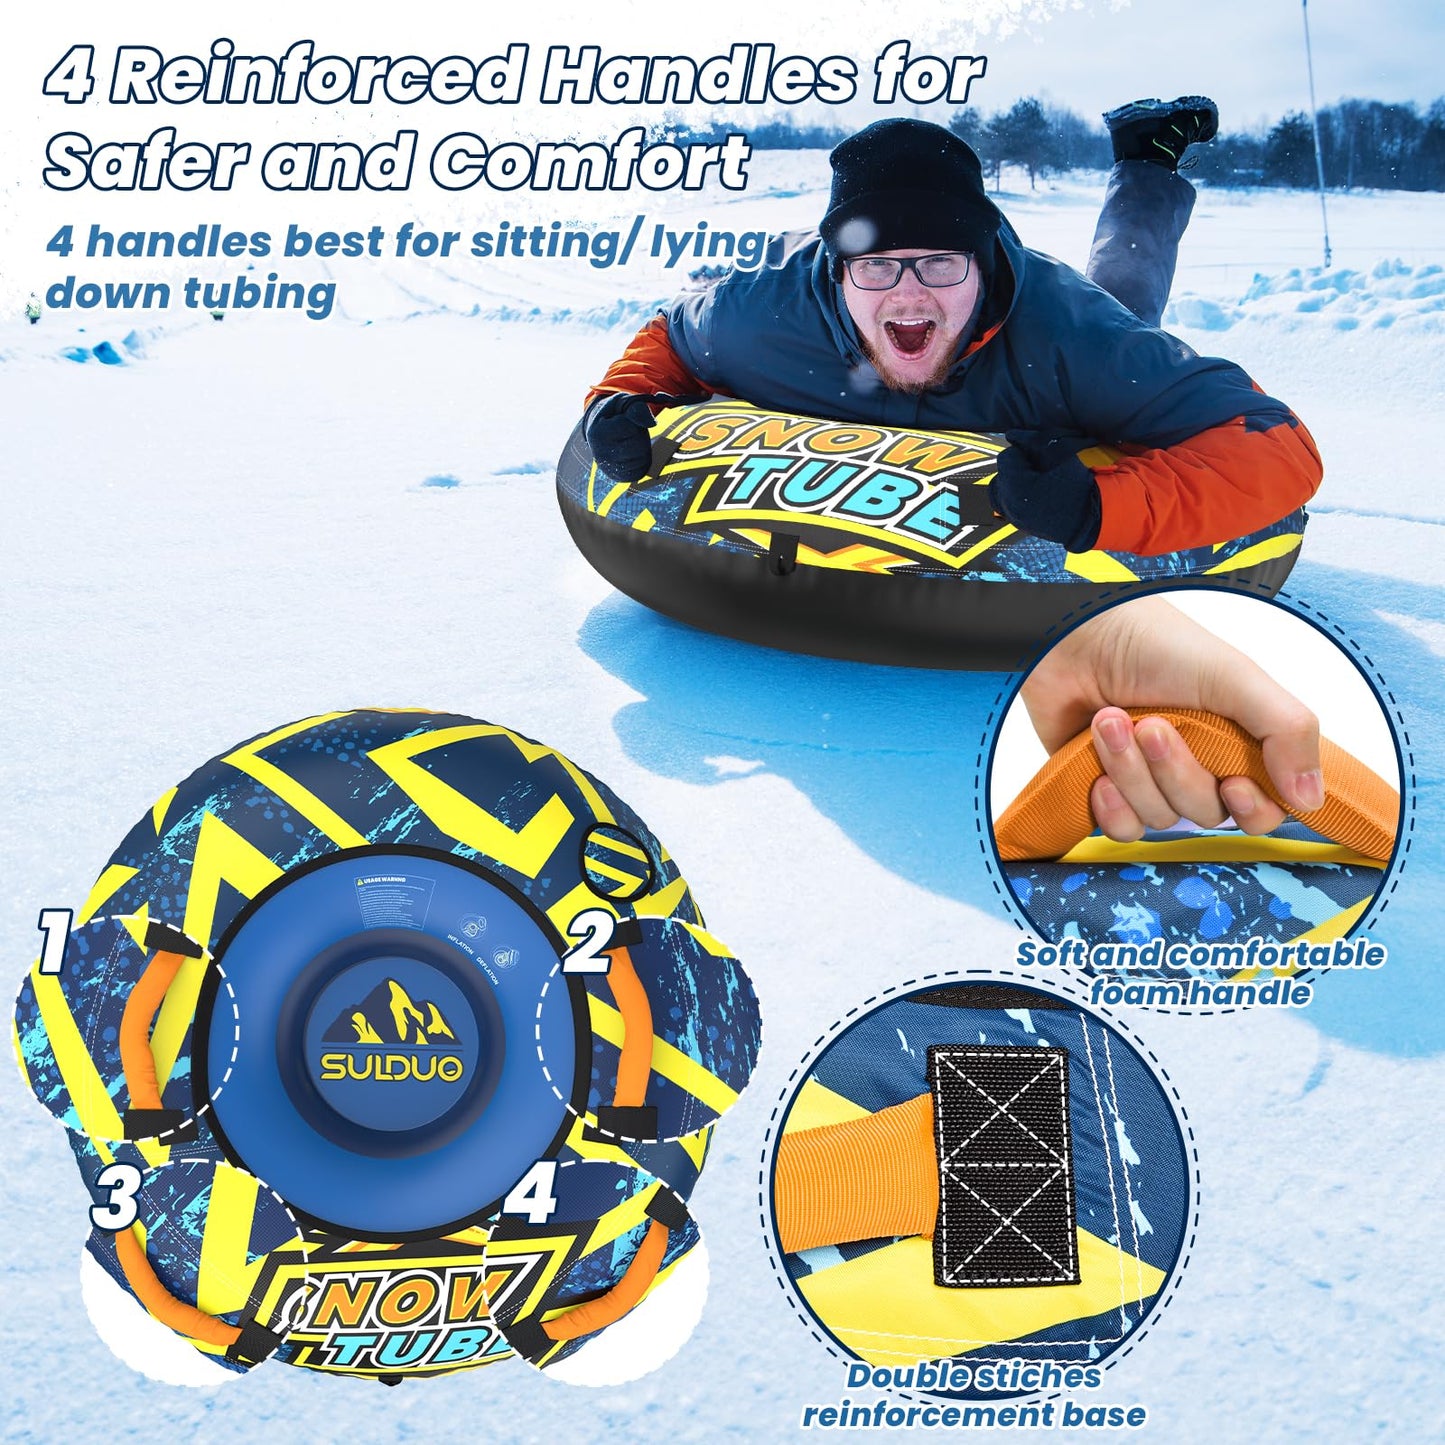 SULDUO 47'' Heavy Duty Snow Tube with Premium Canvas Cover and 4 Foam Filled Handles, Inflatable Snow Sled for Kids and Adult, Thickened Hard Bottom Snow Tubes for Winter Outdoor Fun Sledding